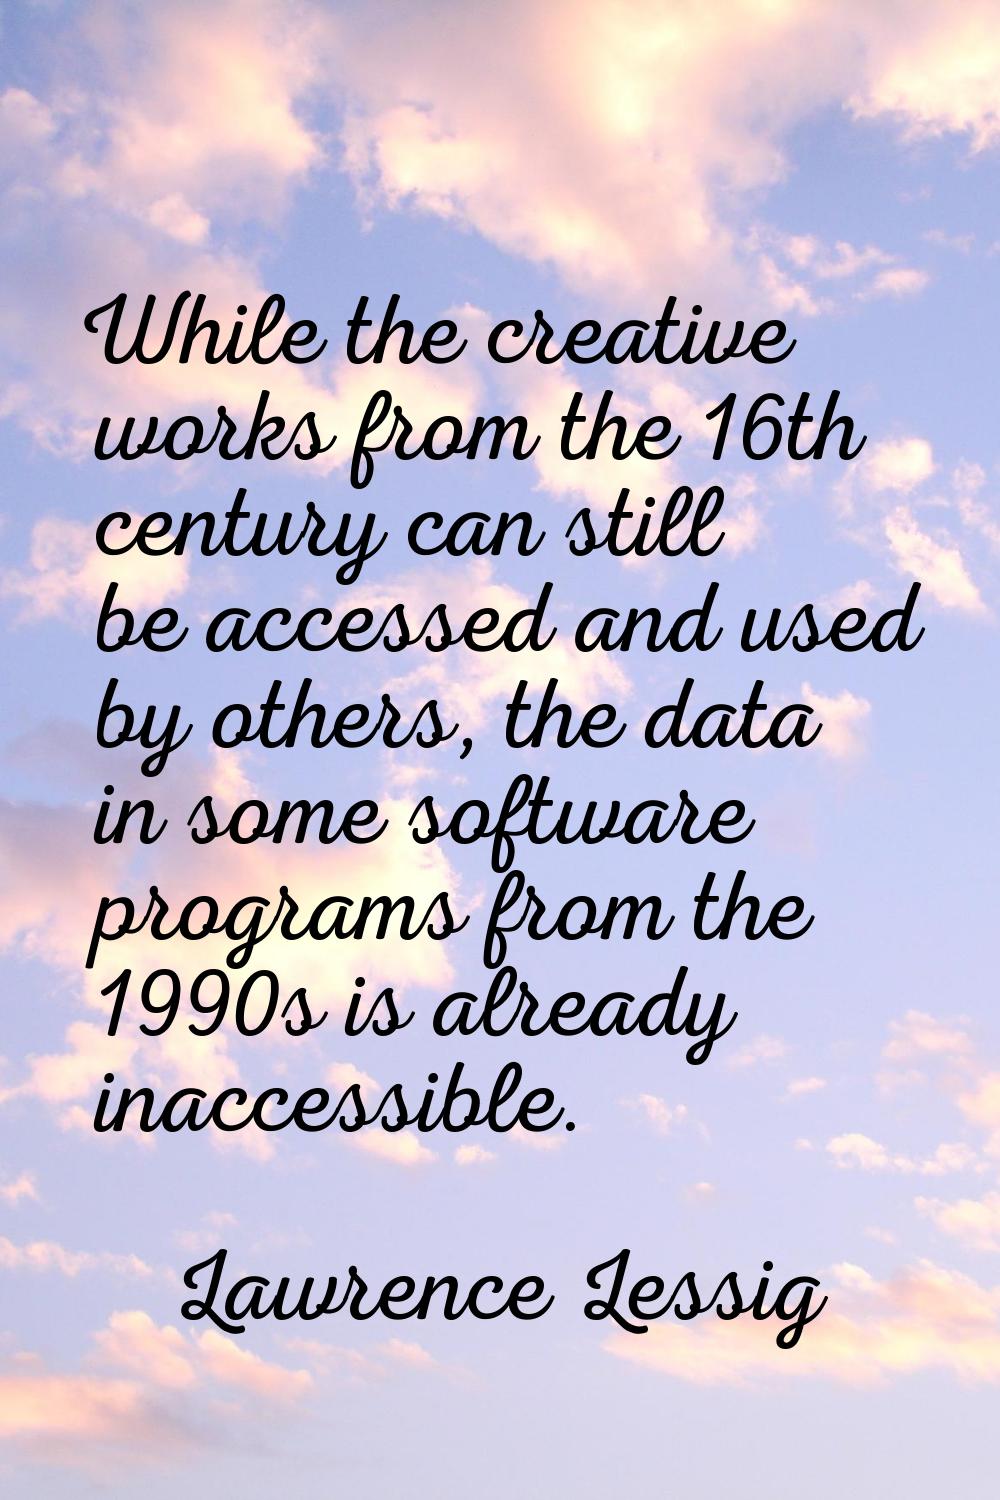 While the creative works from the 16th century can still be accessed and used by others, the data i